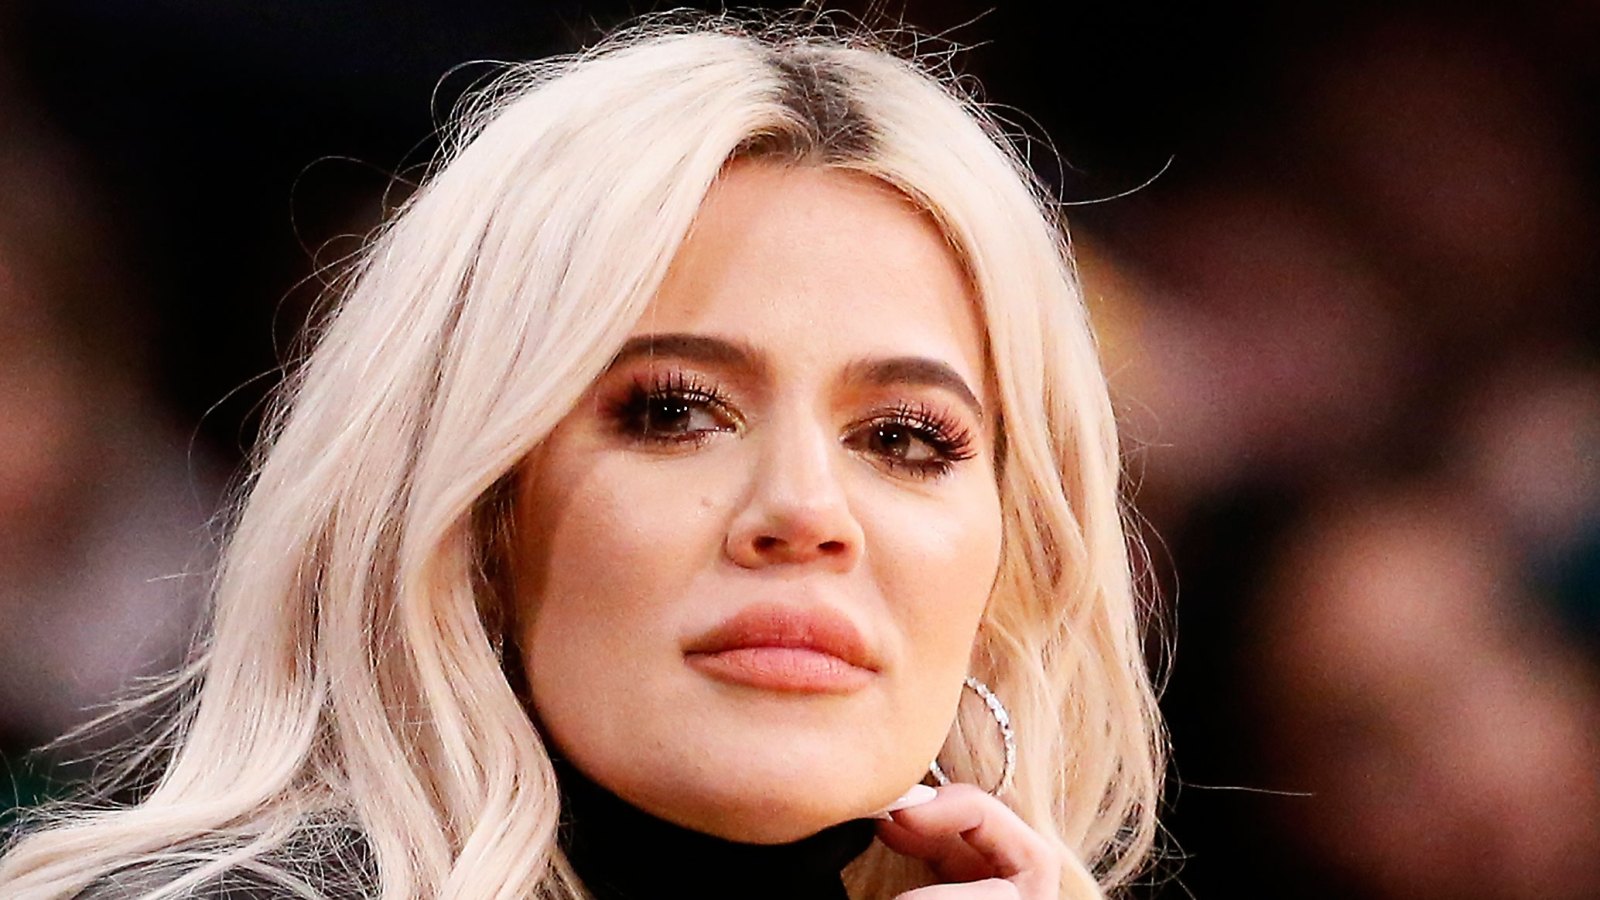 Khloe Kardashian Gives Relationship Advice to Fan with Broken Heart: 'Time Really Does Heal Everything'